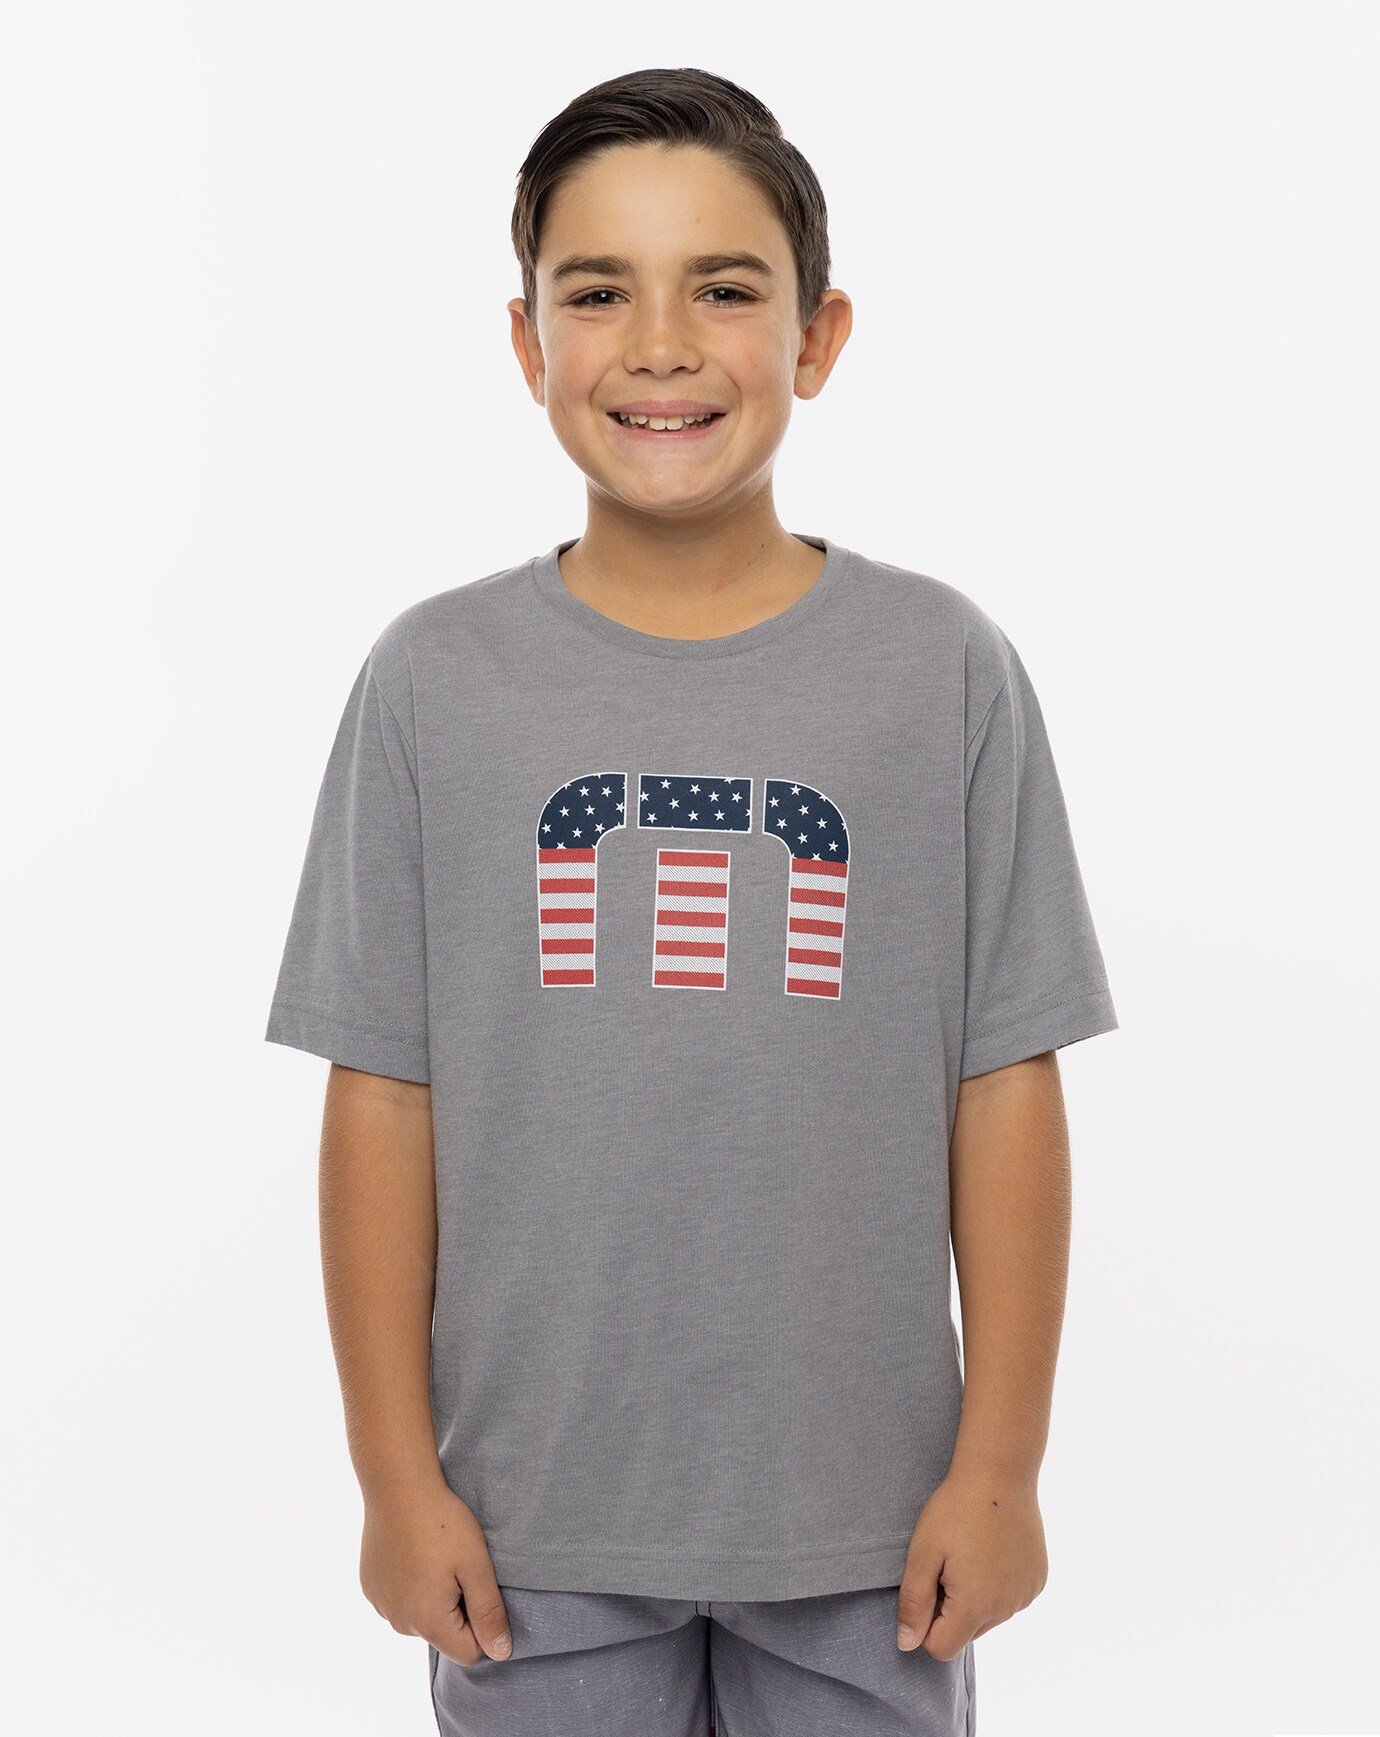 STAR BRIGHT YOUTH TEE Image 1